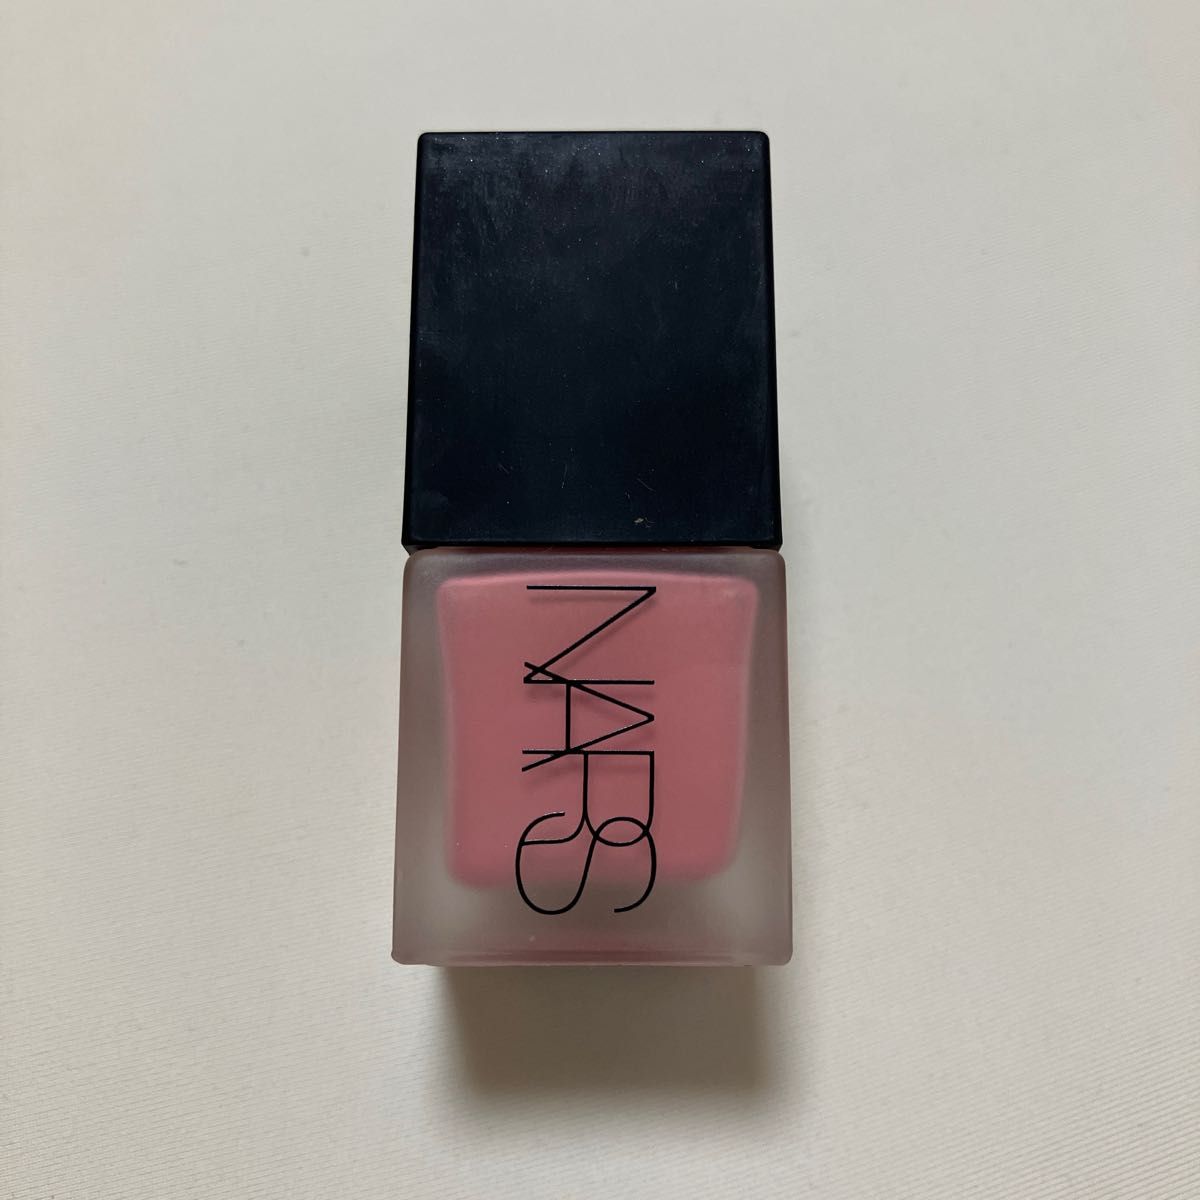 NARS リキッドブラッシュ（5155 ピーチピンク）｜PayPayフリマ